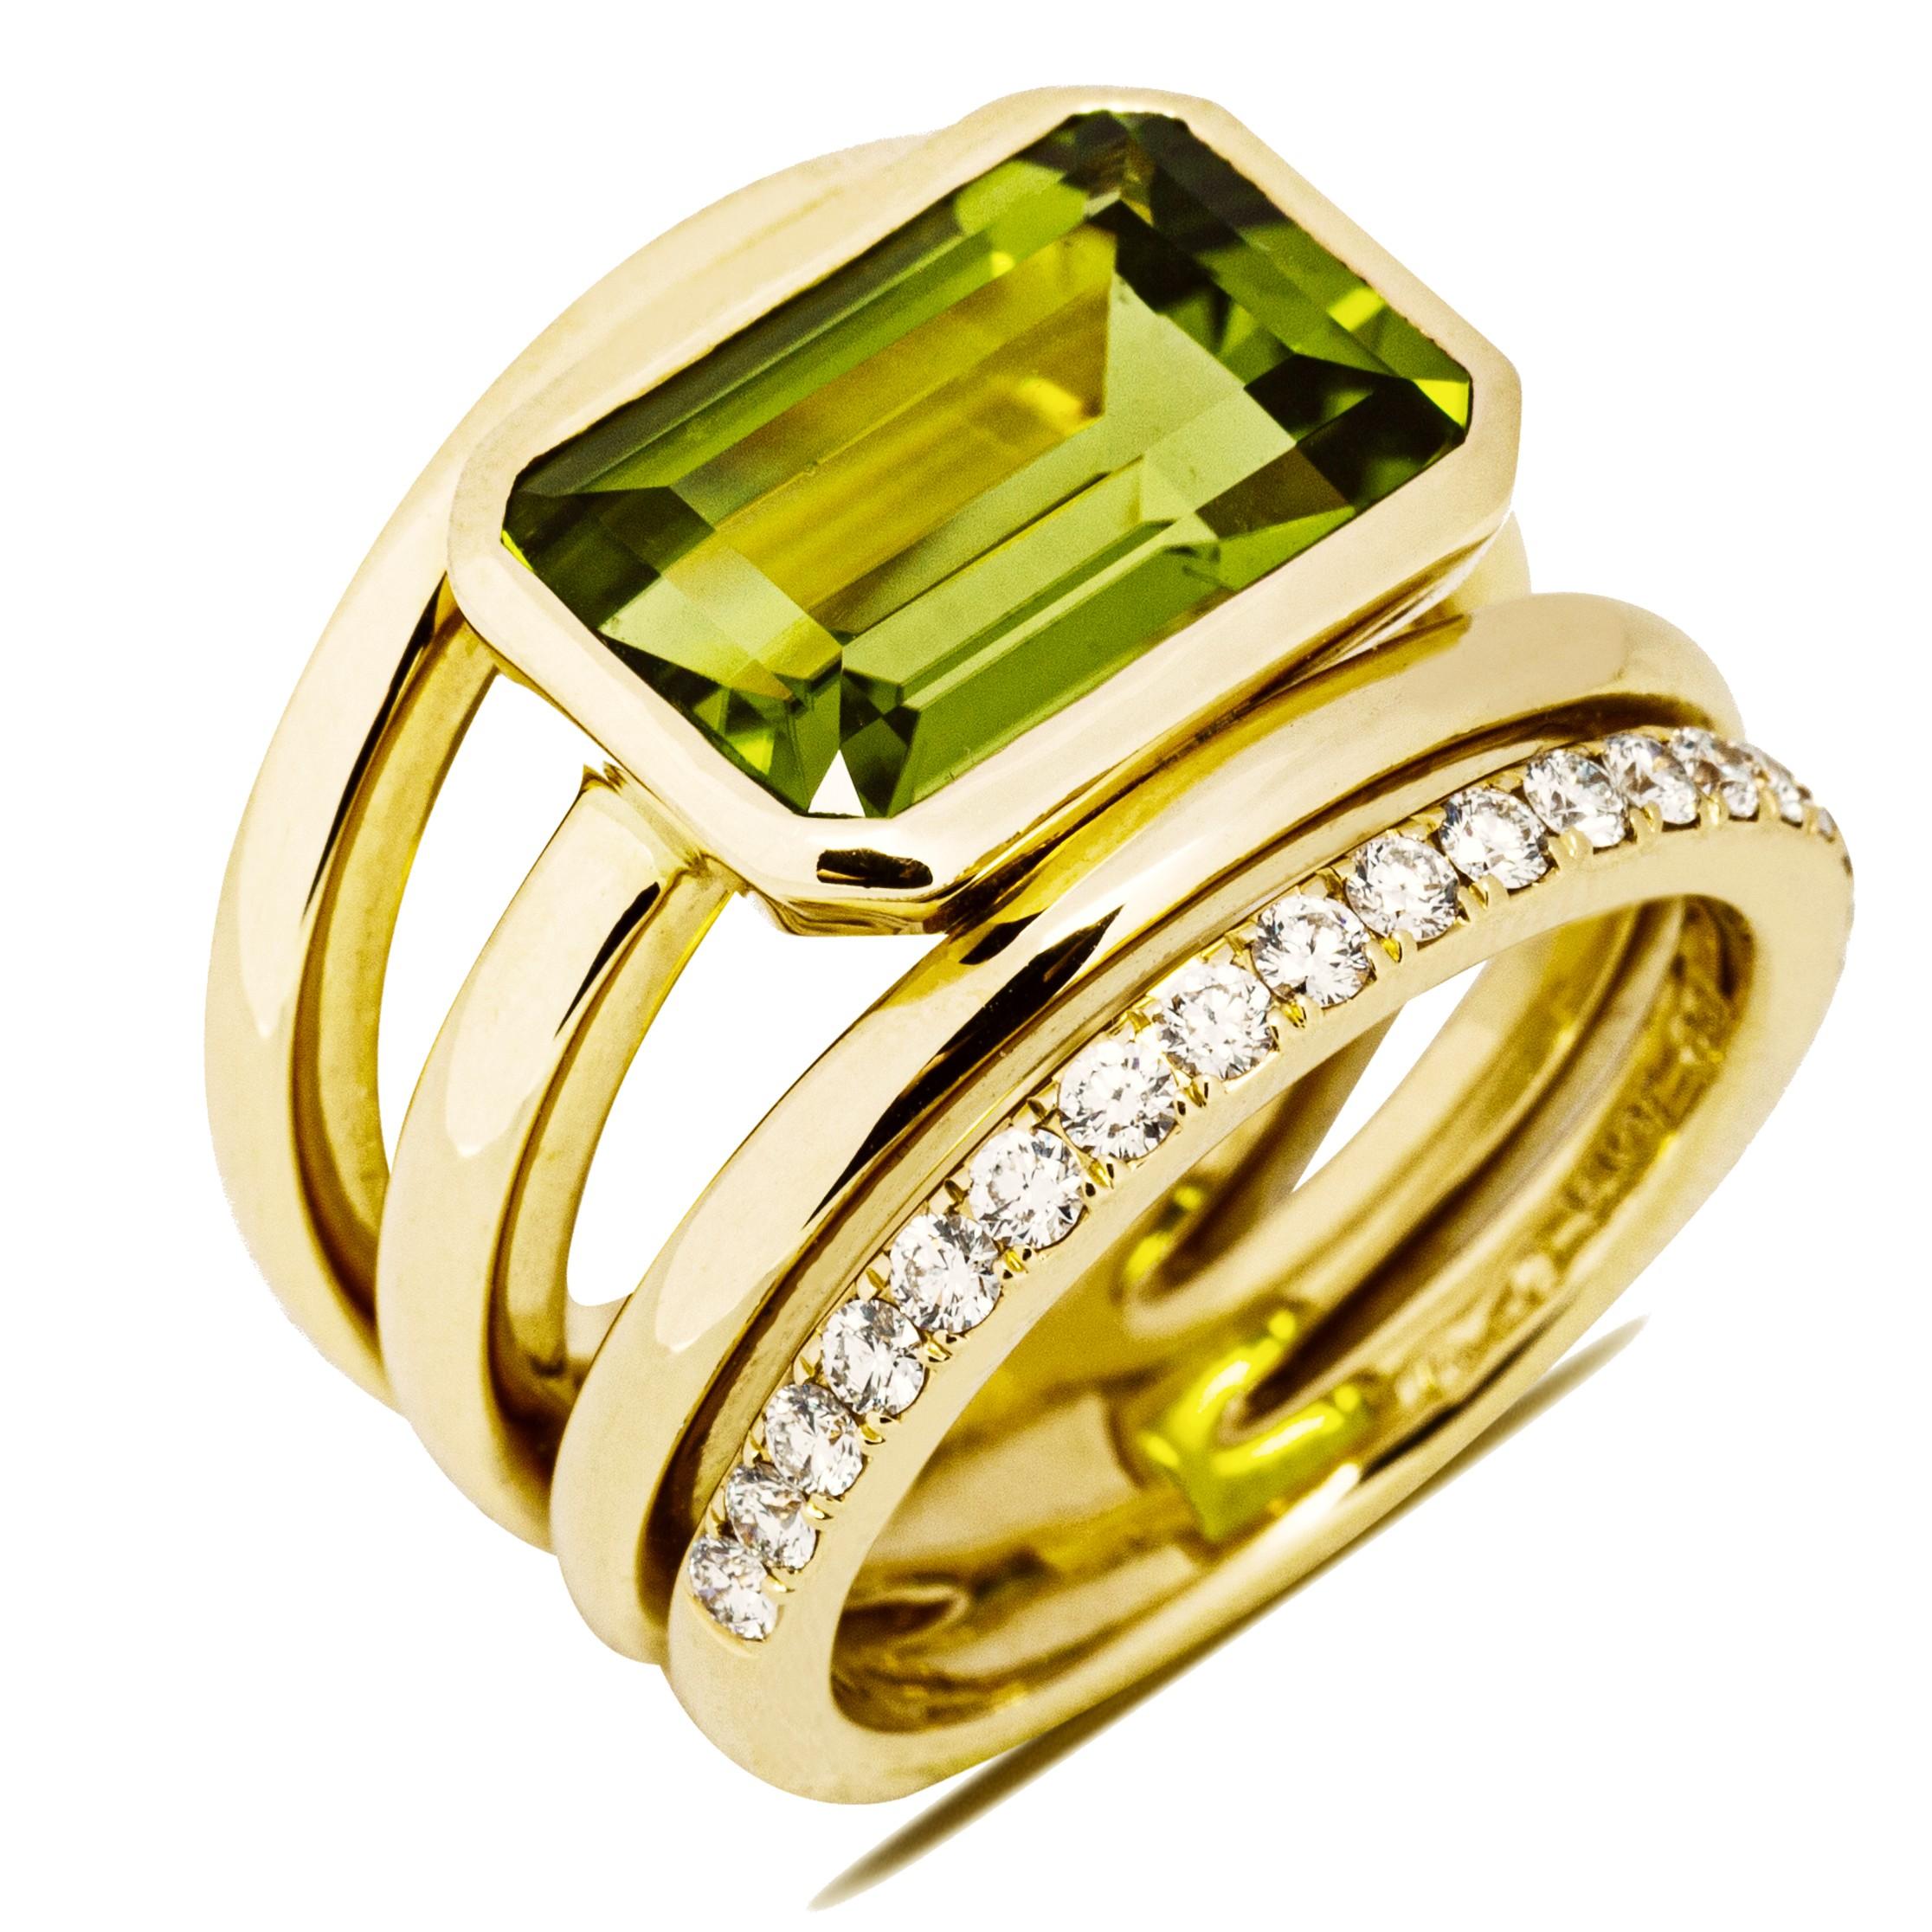 Alex Jona design collection, hand crafted in Italy, 18 karat yellow gold band ring set with a 5.92 carat emerald cut Peridot and 0.40 carats of white diamonds.
Dimension : H 0.93 in / 23.74 mm X W 0.86 in / 22.06 mm X D 0.22 in/ 5.80 mm

Alex Jona